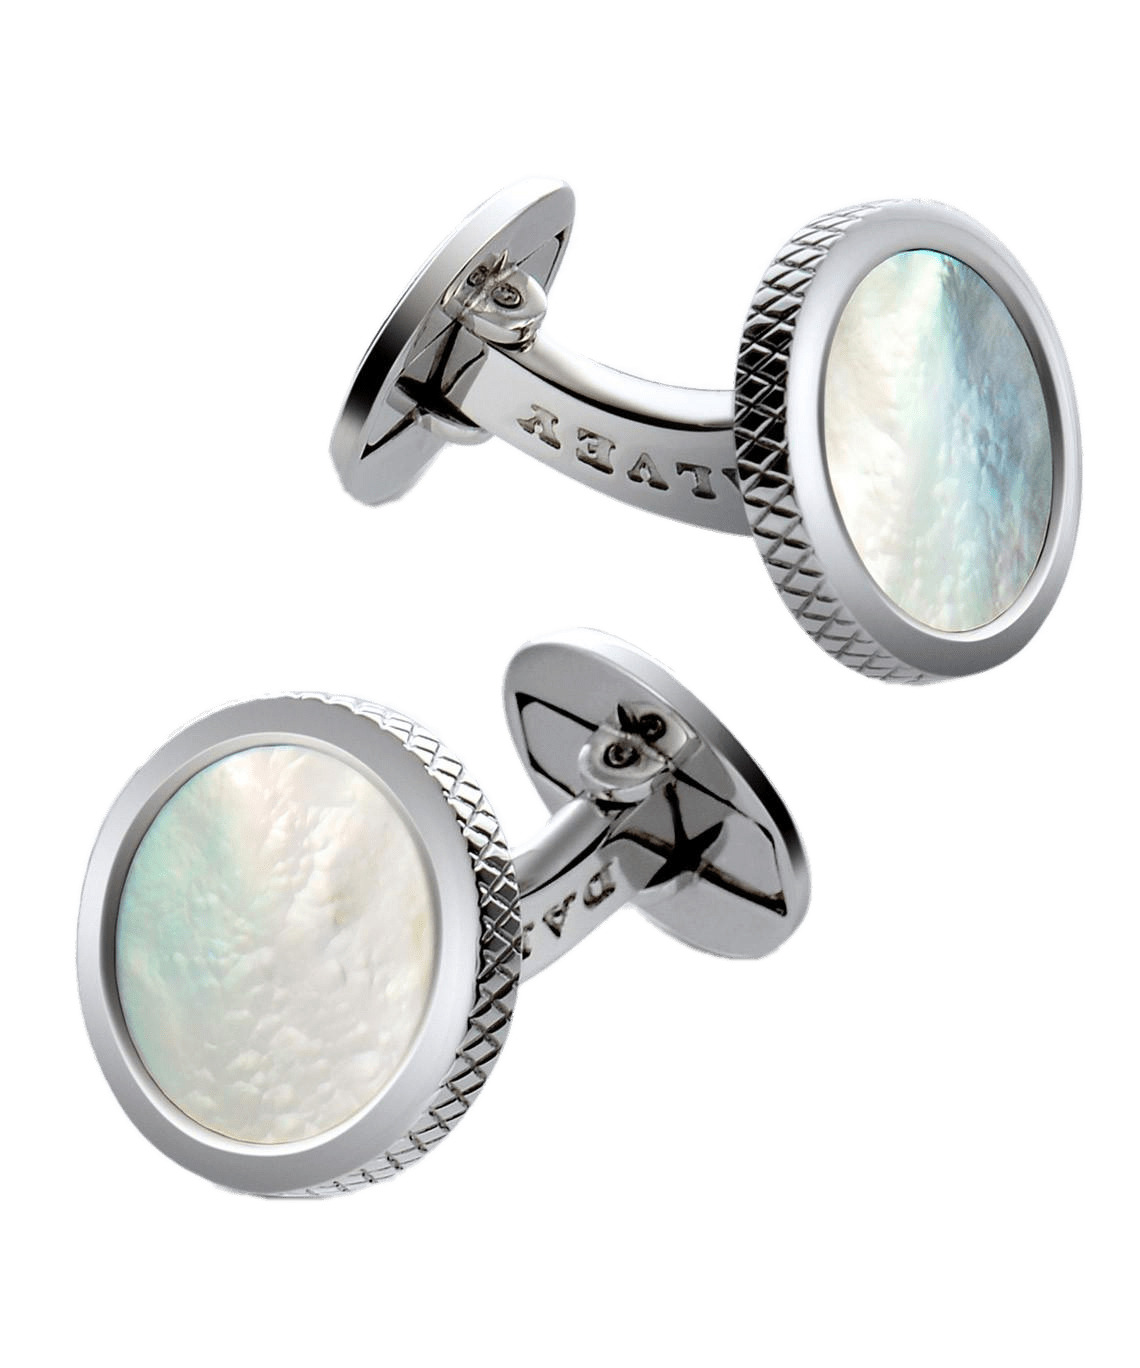 Dalvey Cufflinks png icons